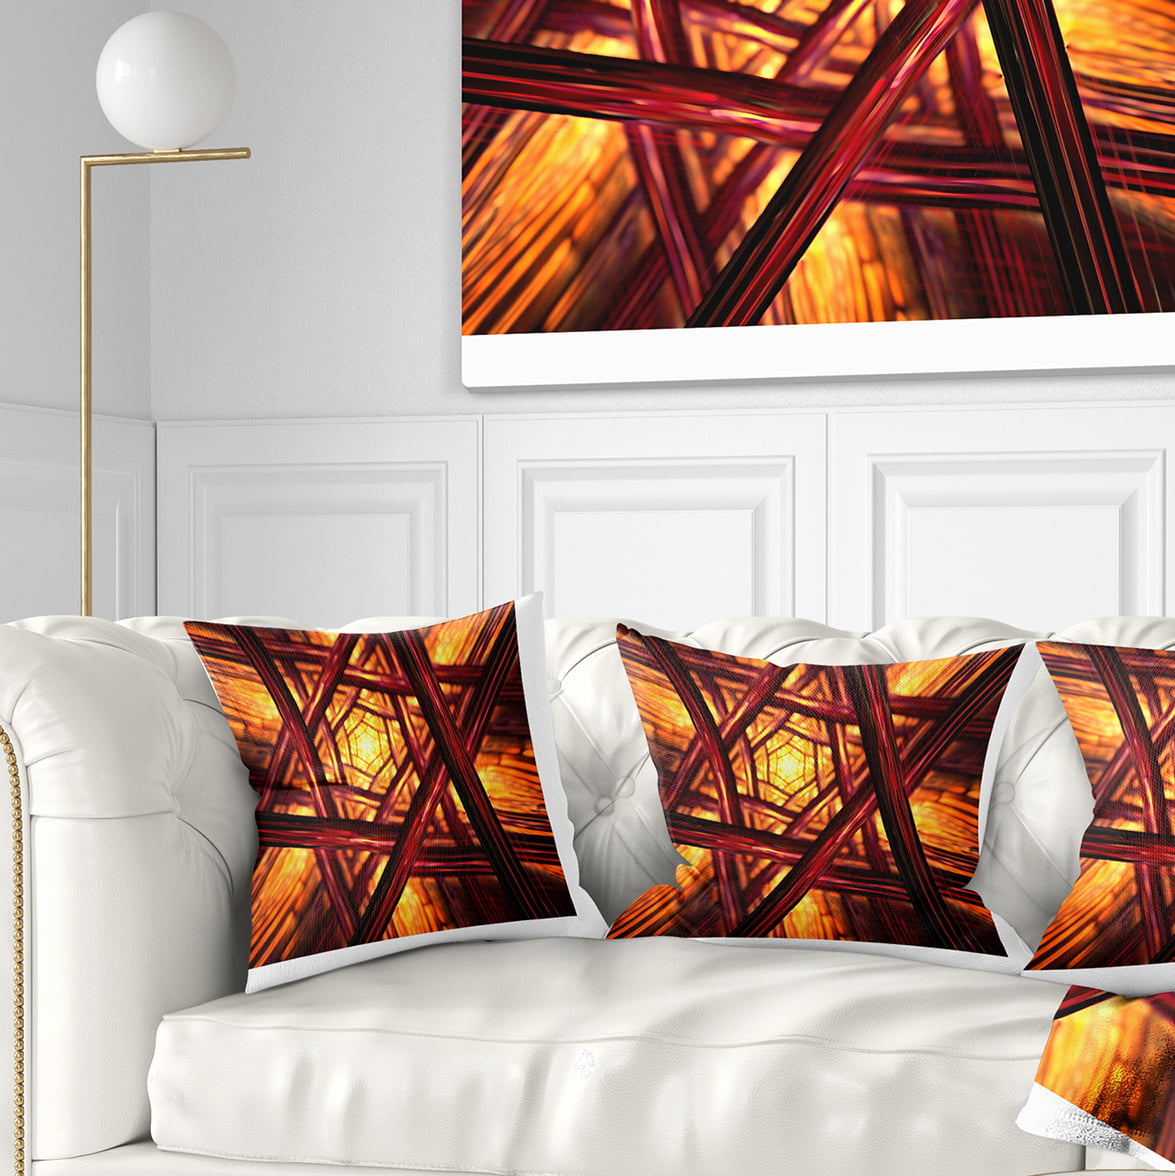 Designart CU8323-12-20 Fractal Mandala Design Abstract Lumbar Cushion Cover for Living Room x 20 in Insert Printed On Both Side in Sofa Throw Pillow 12 in 